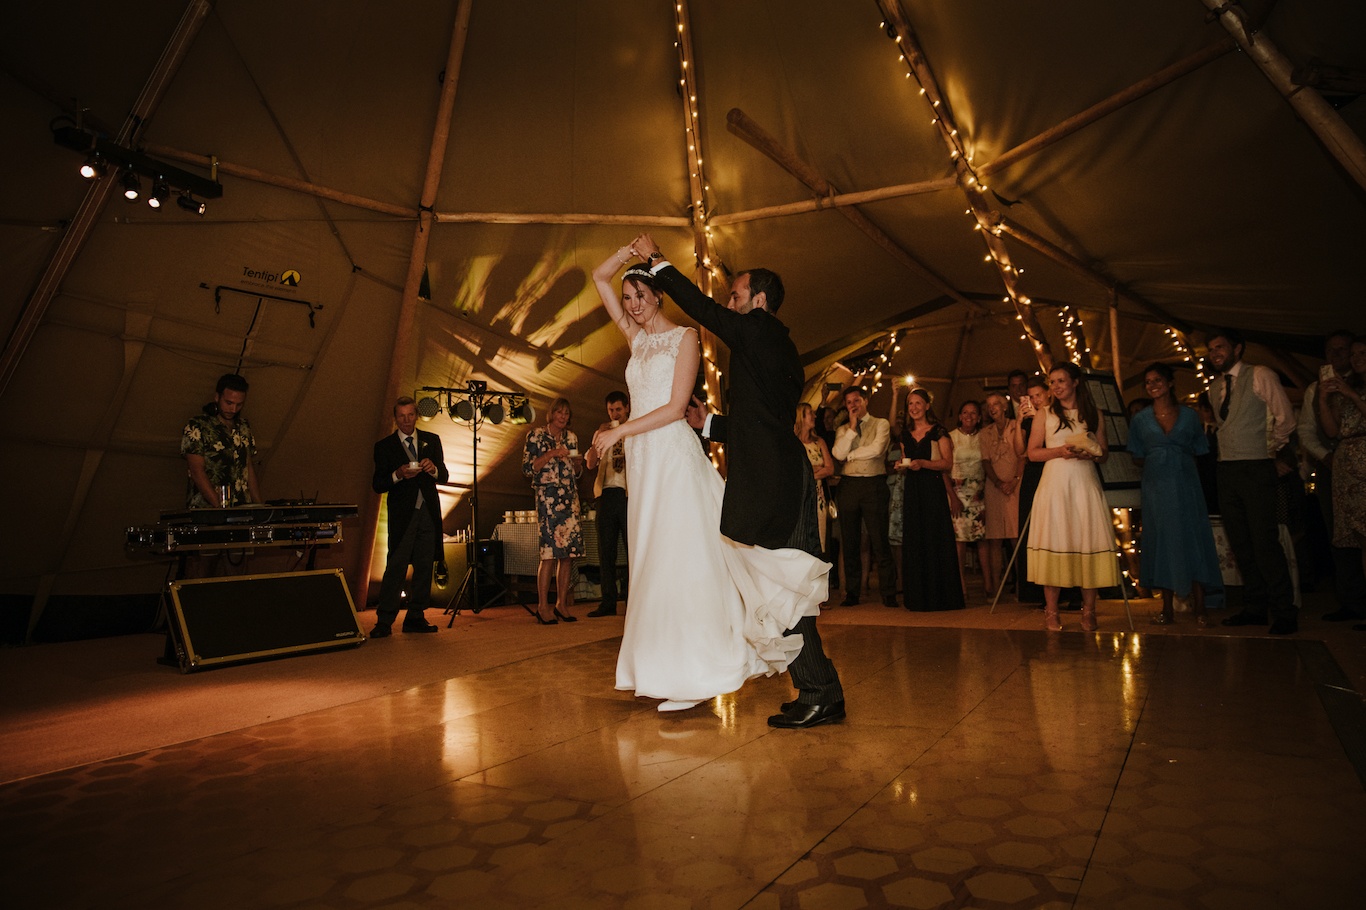 Bride and Groom dancing in a tipi